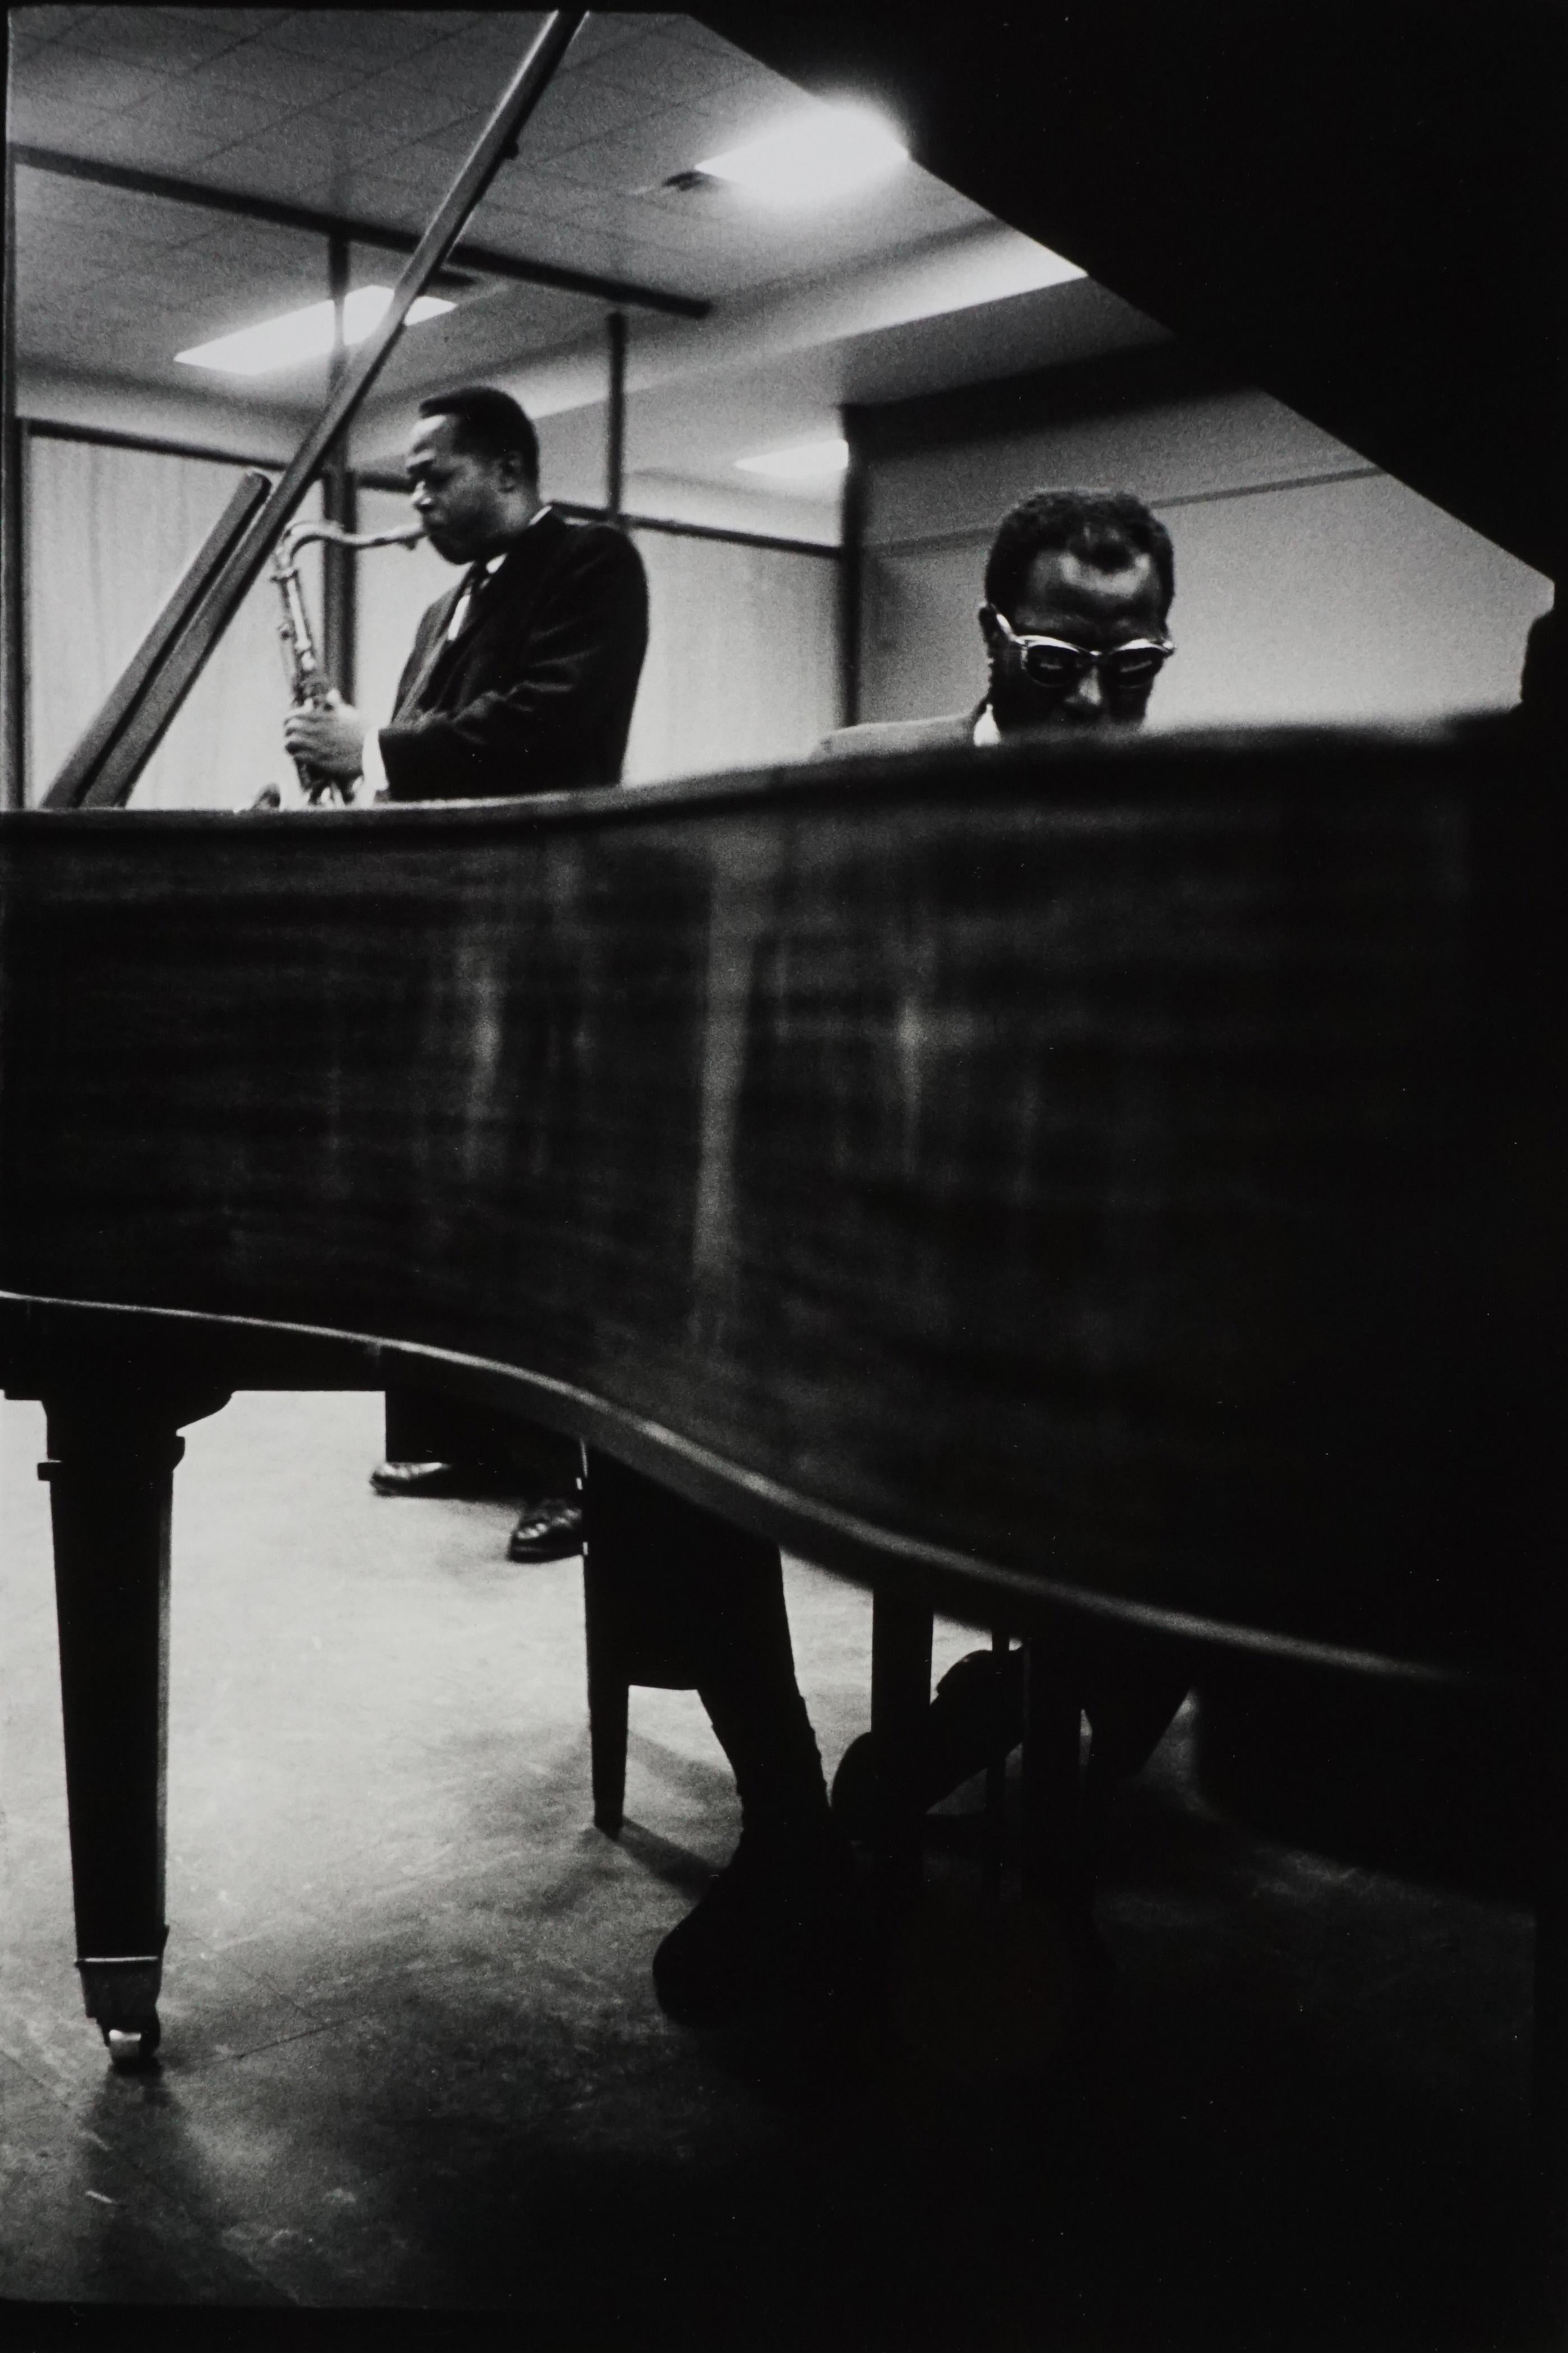 Herb Snitzer Black and White Photograph - Thelonious Monk and Charlie Rouse, The United Nations, New York City, 1961